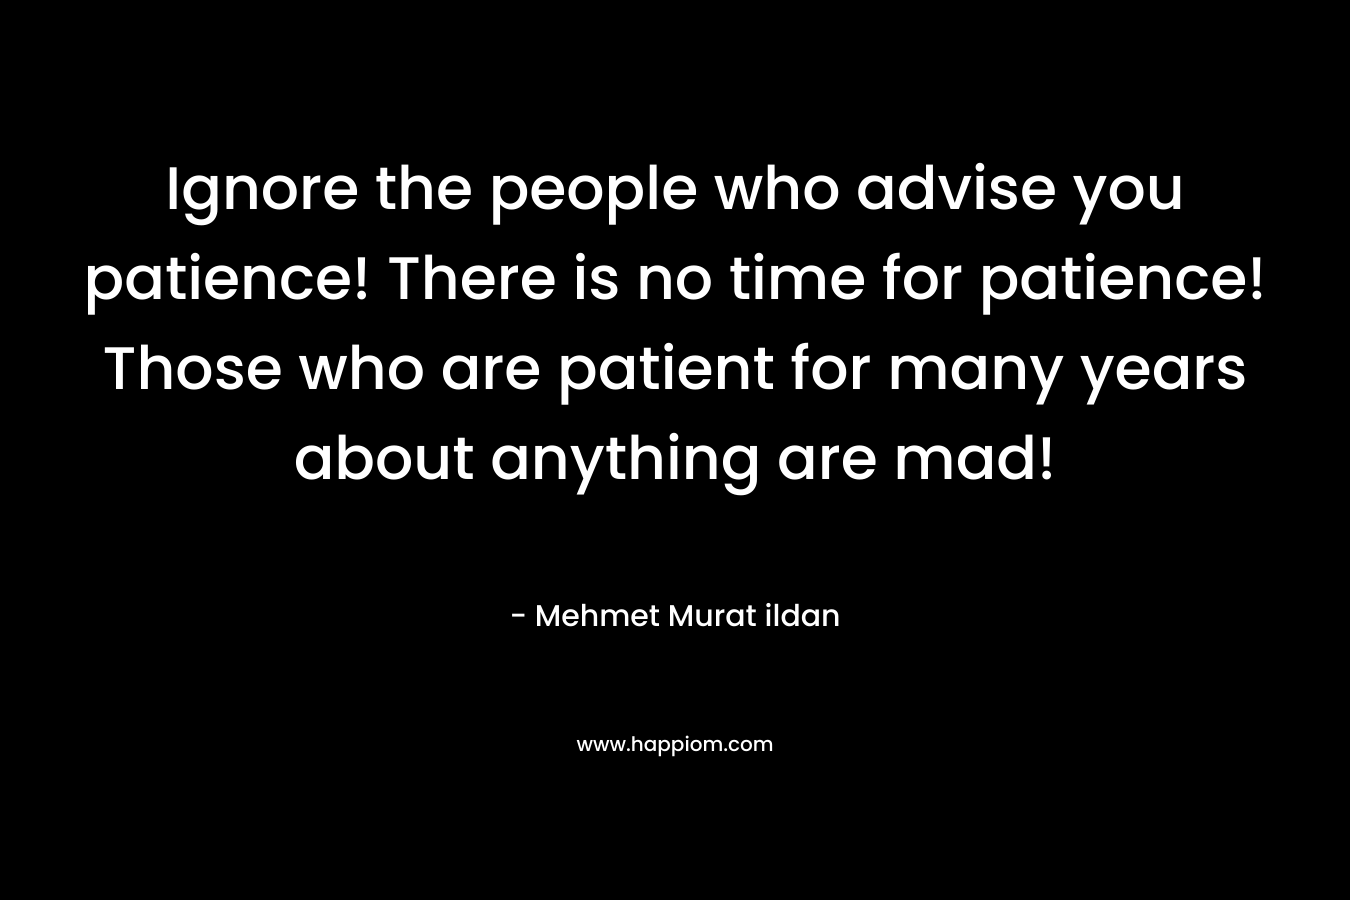 Ignore the people who advise you patience! There is no time for patience! Those who are patient for many years about anything are mad!